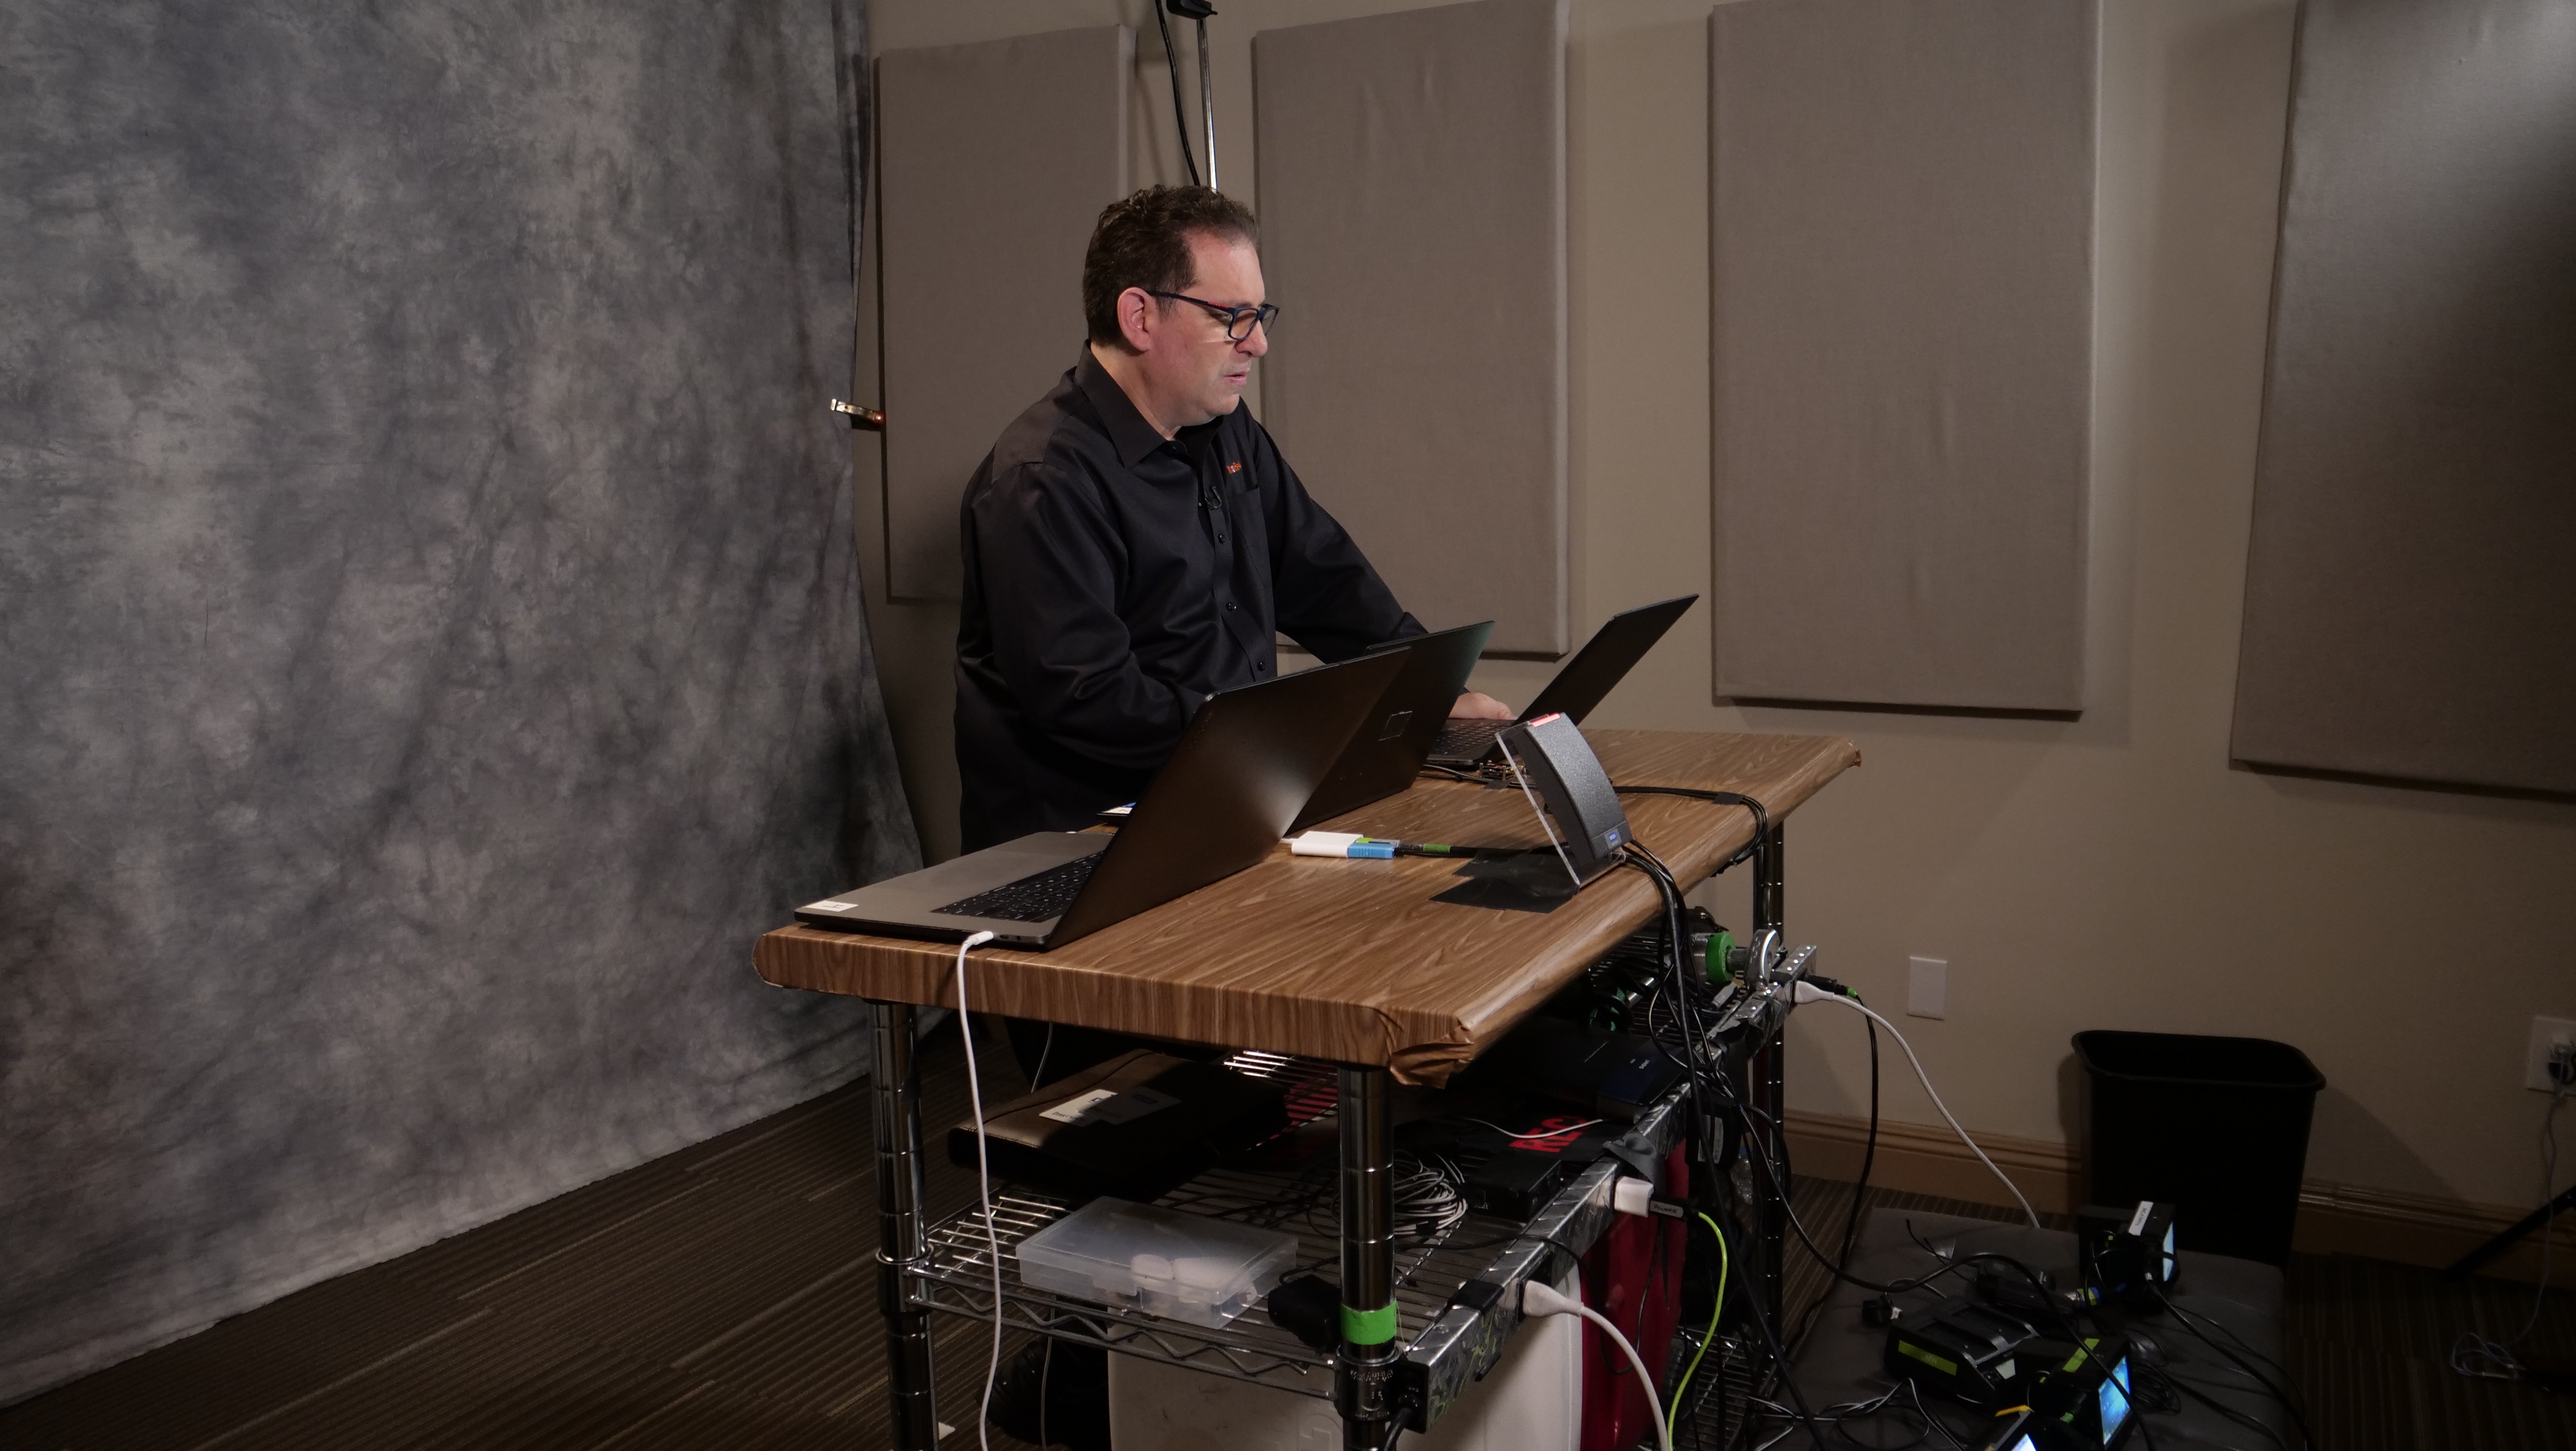 WATCH Kevin Mitnick explains how hackers use social engineering to